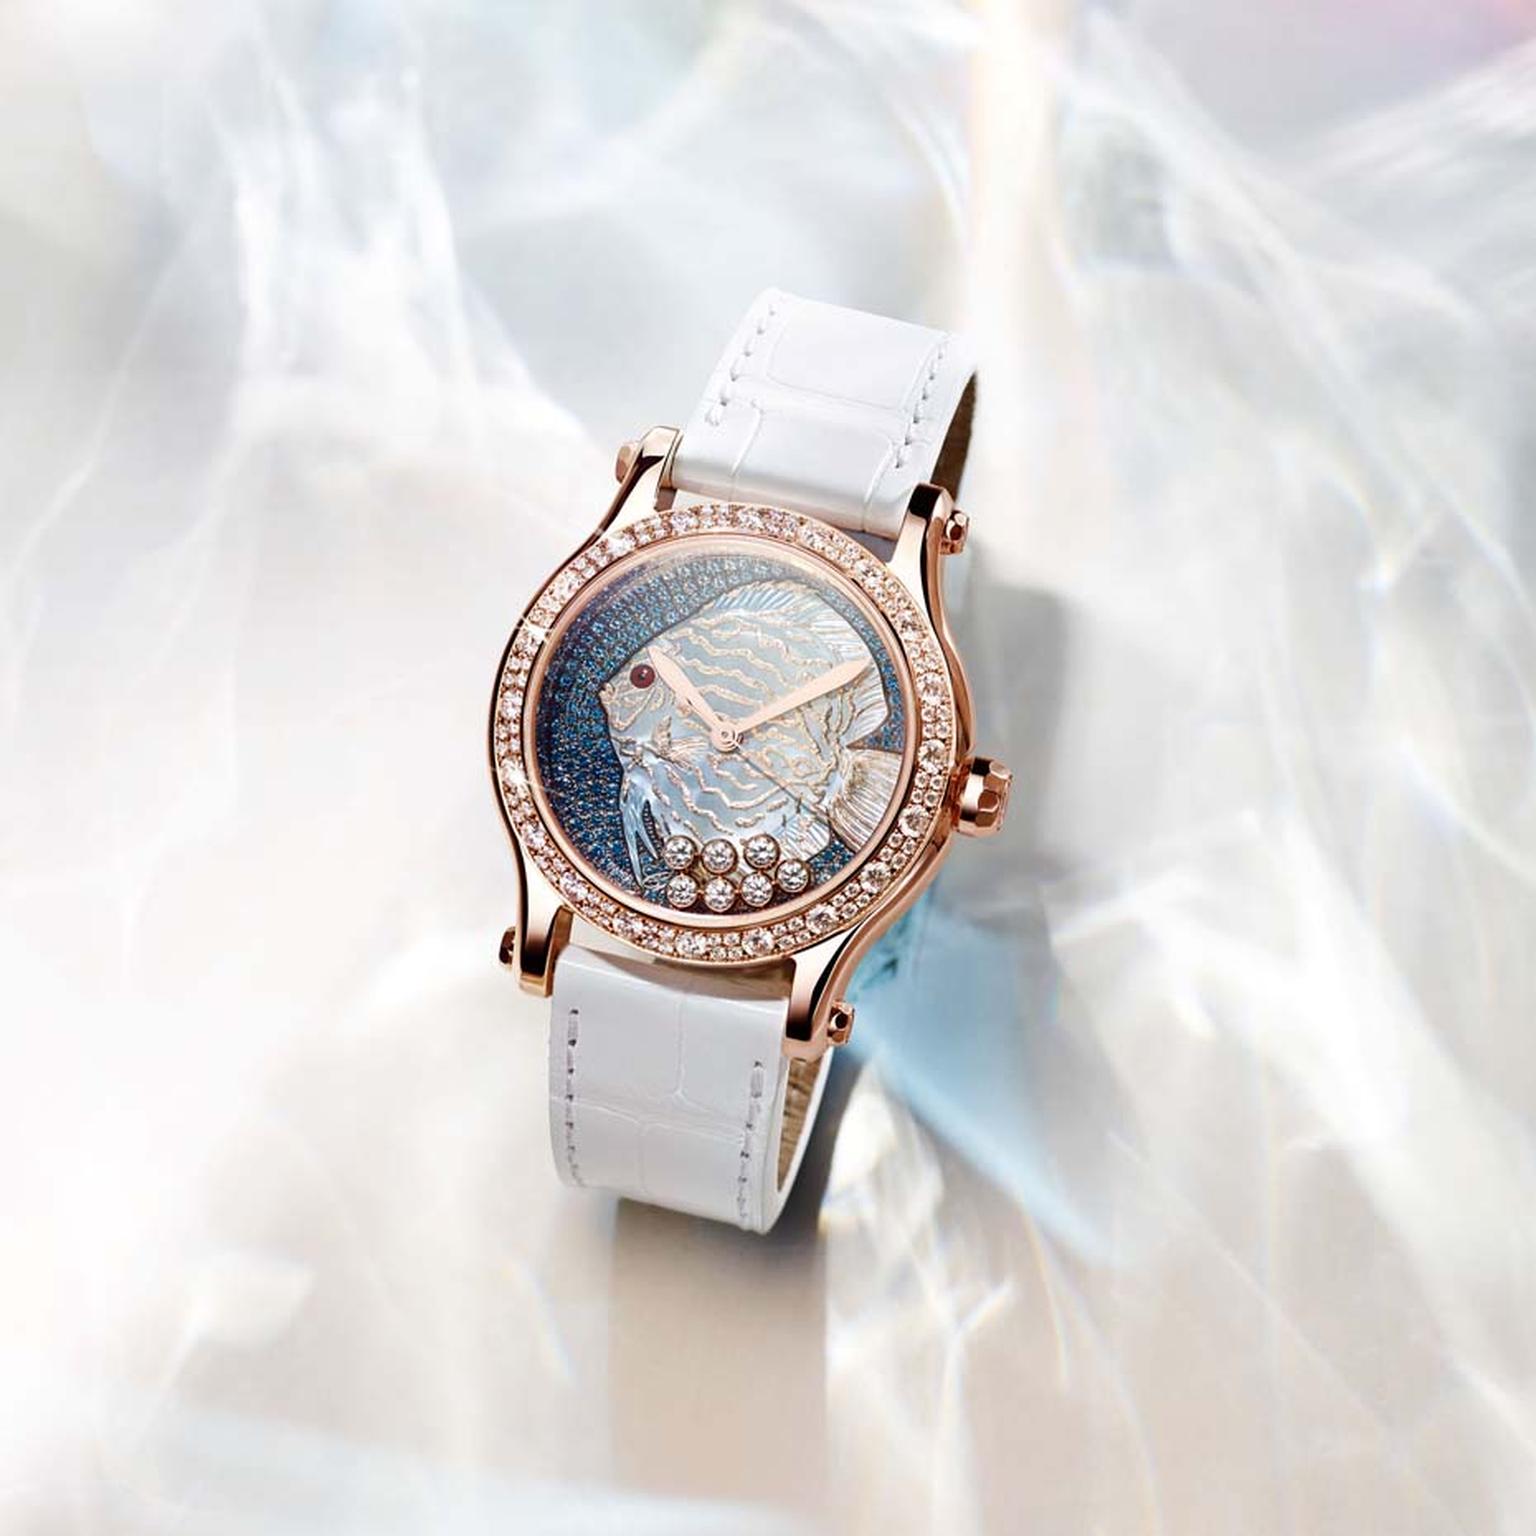 Fish watches_Chopard_Happy Fish watch by day.jpg